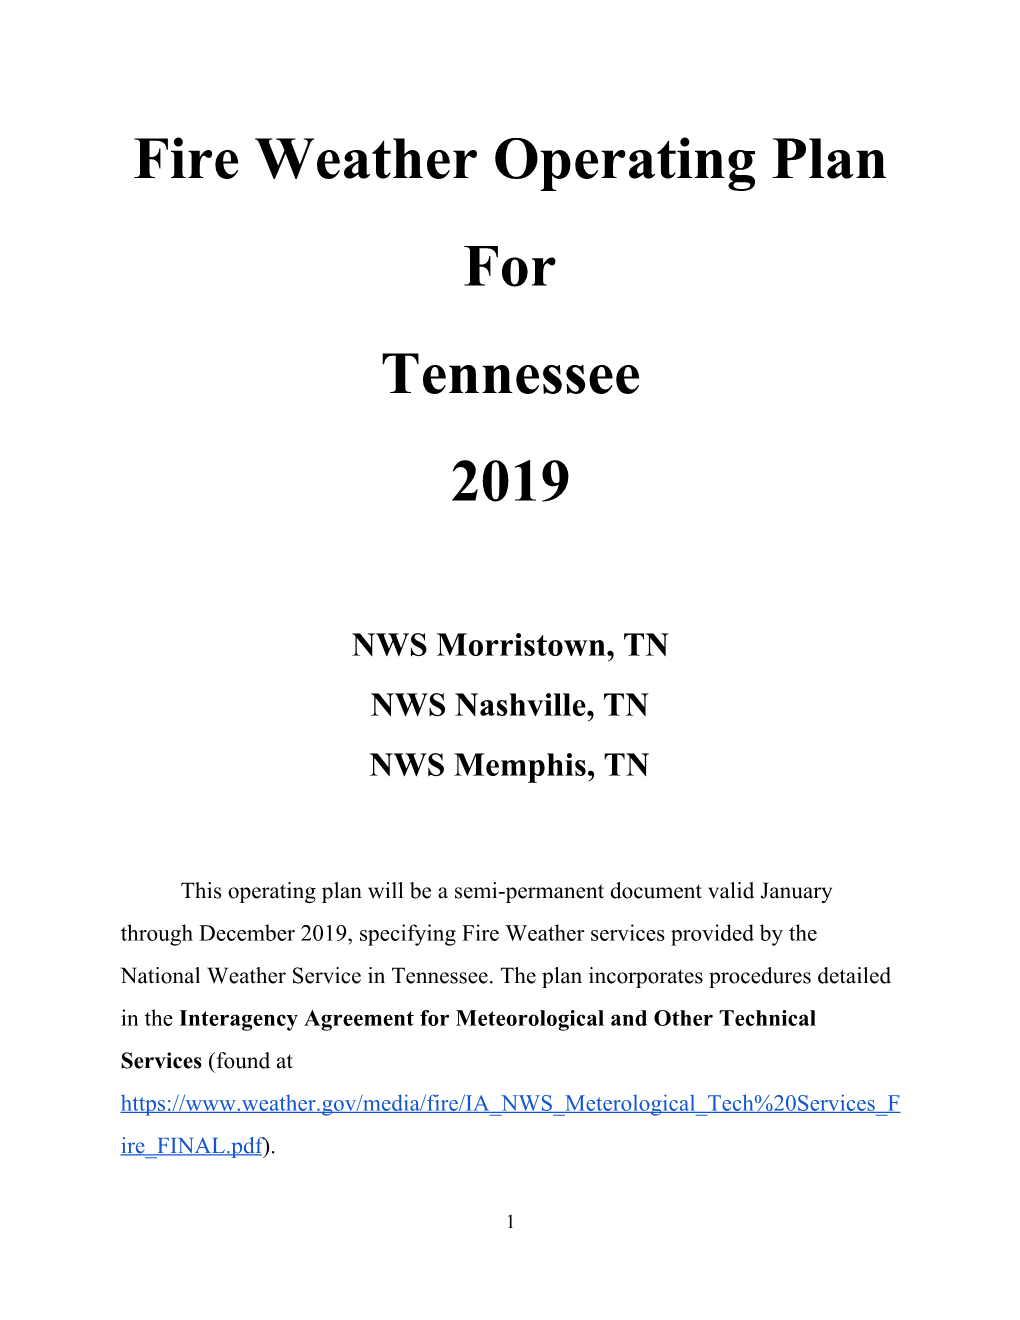 Fire Weather Operating Plan for Tennessee 2019